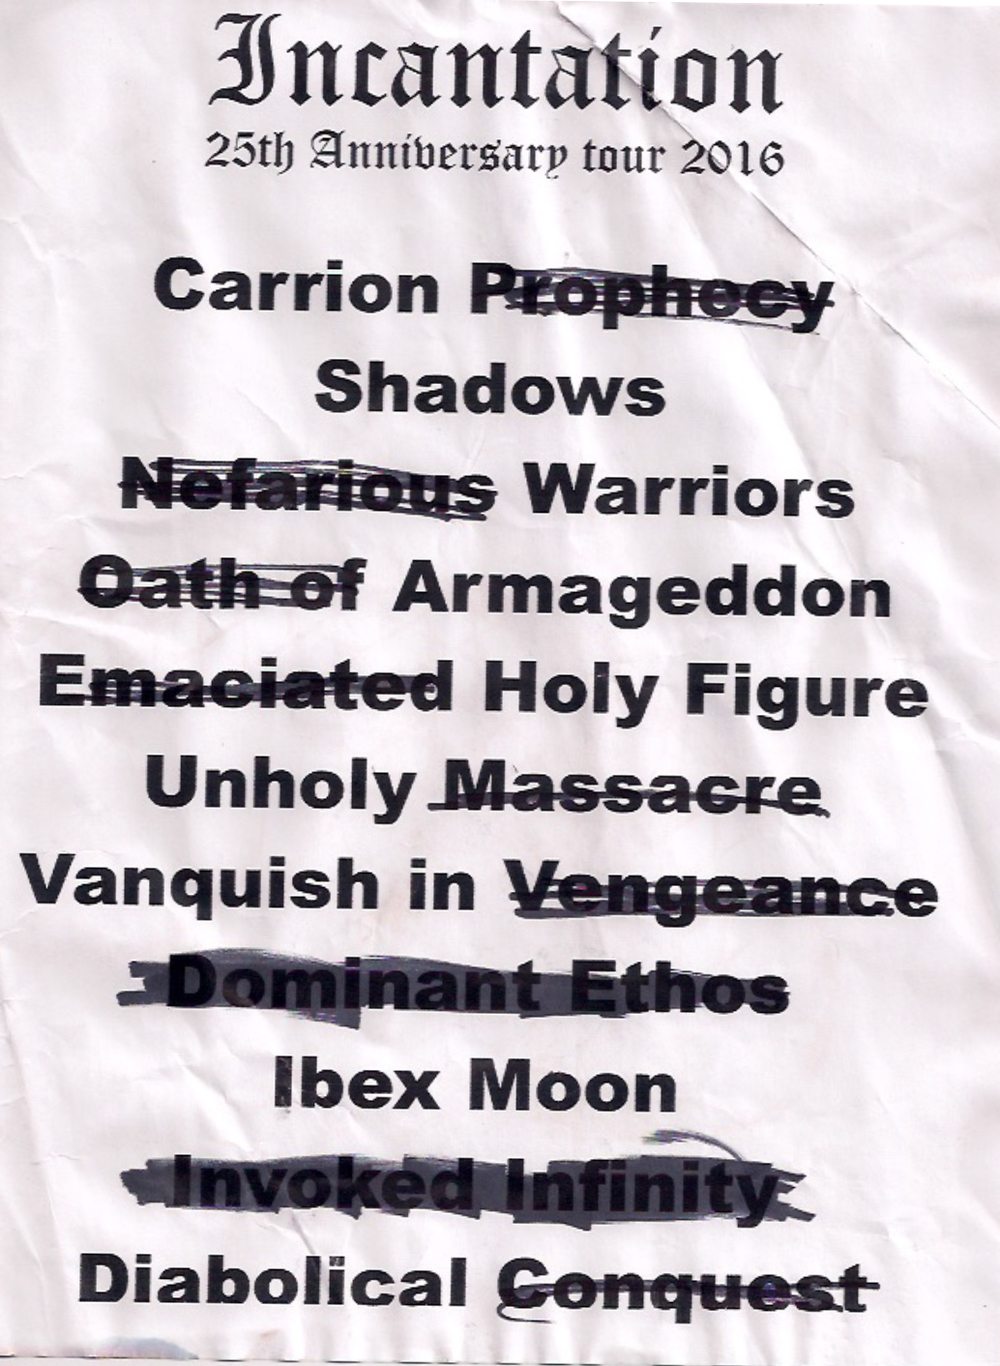 Incantation's Russian-mandated altered song-titles/set list